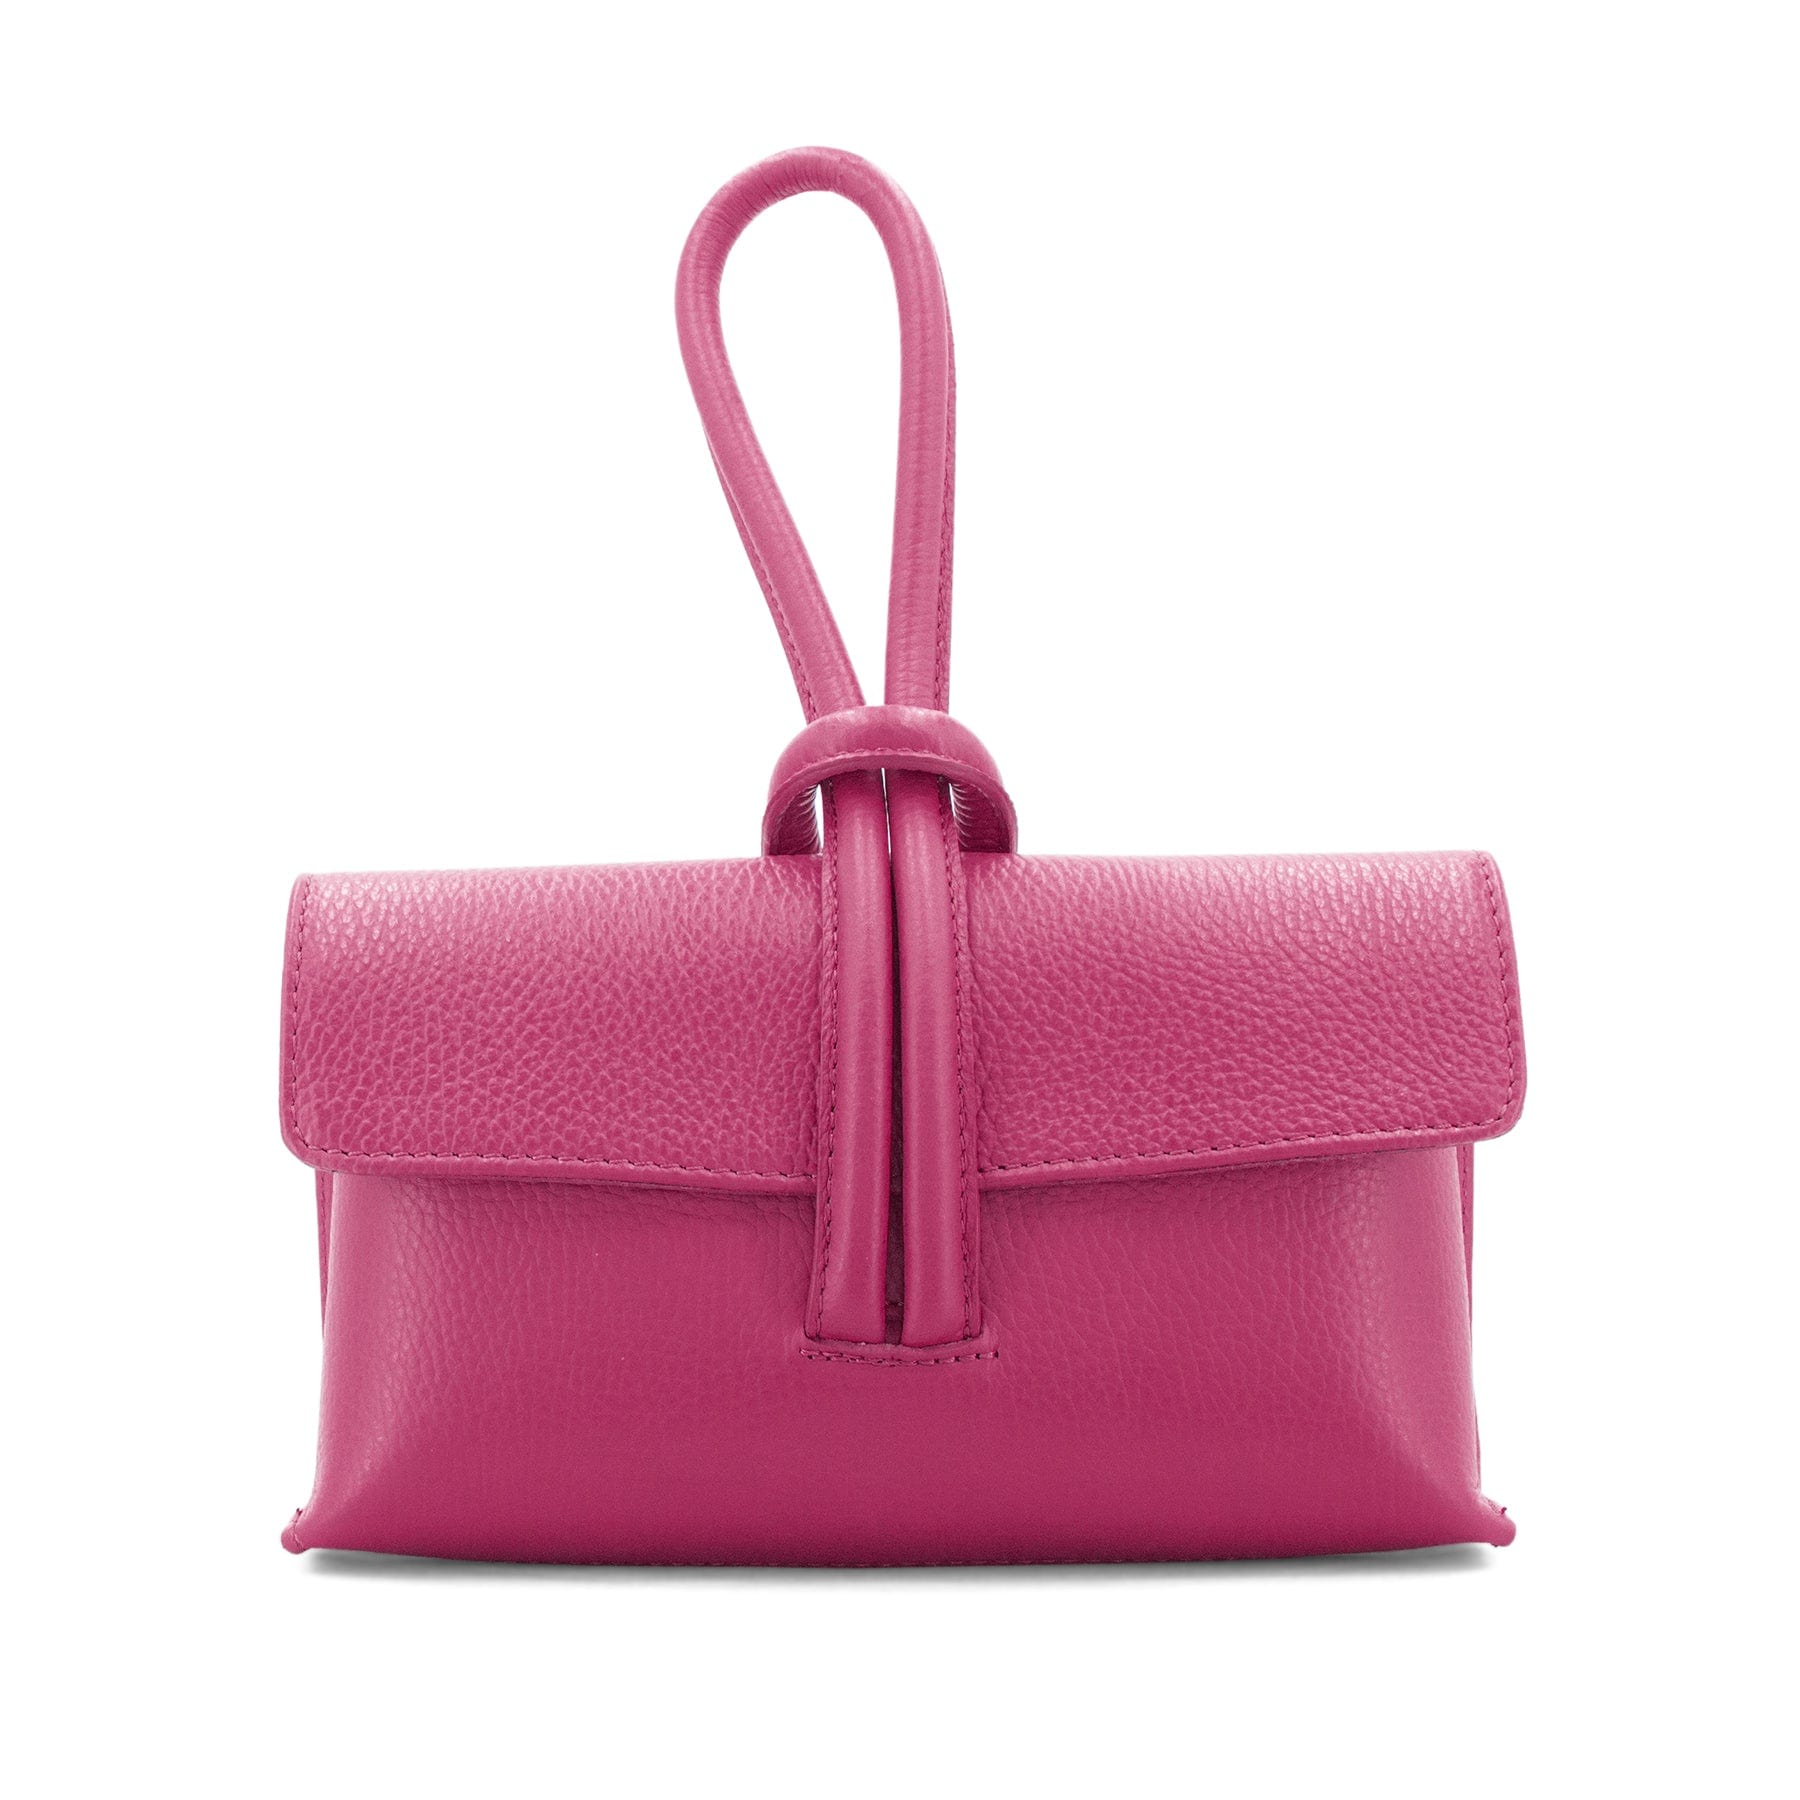 lusciousscarves Hot pink Italian Leather Clutch Bag, Evening Bag with Loop Handle